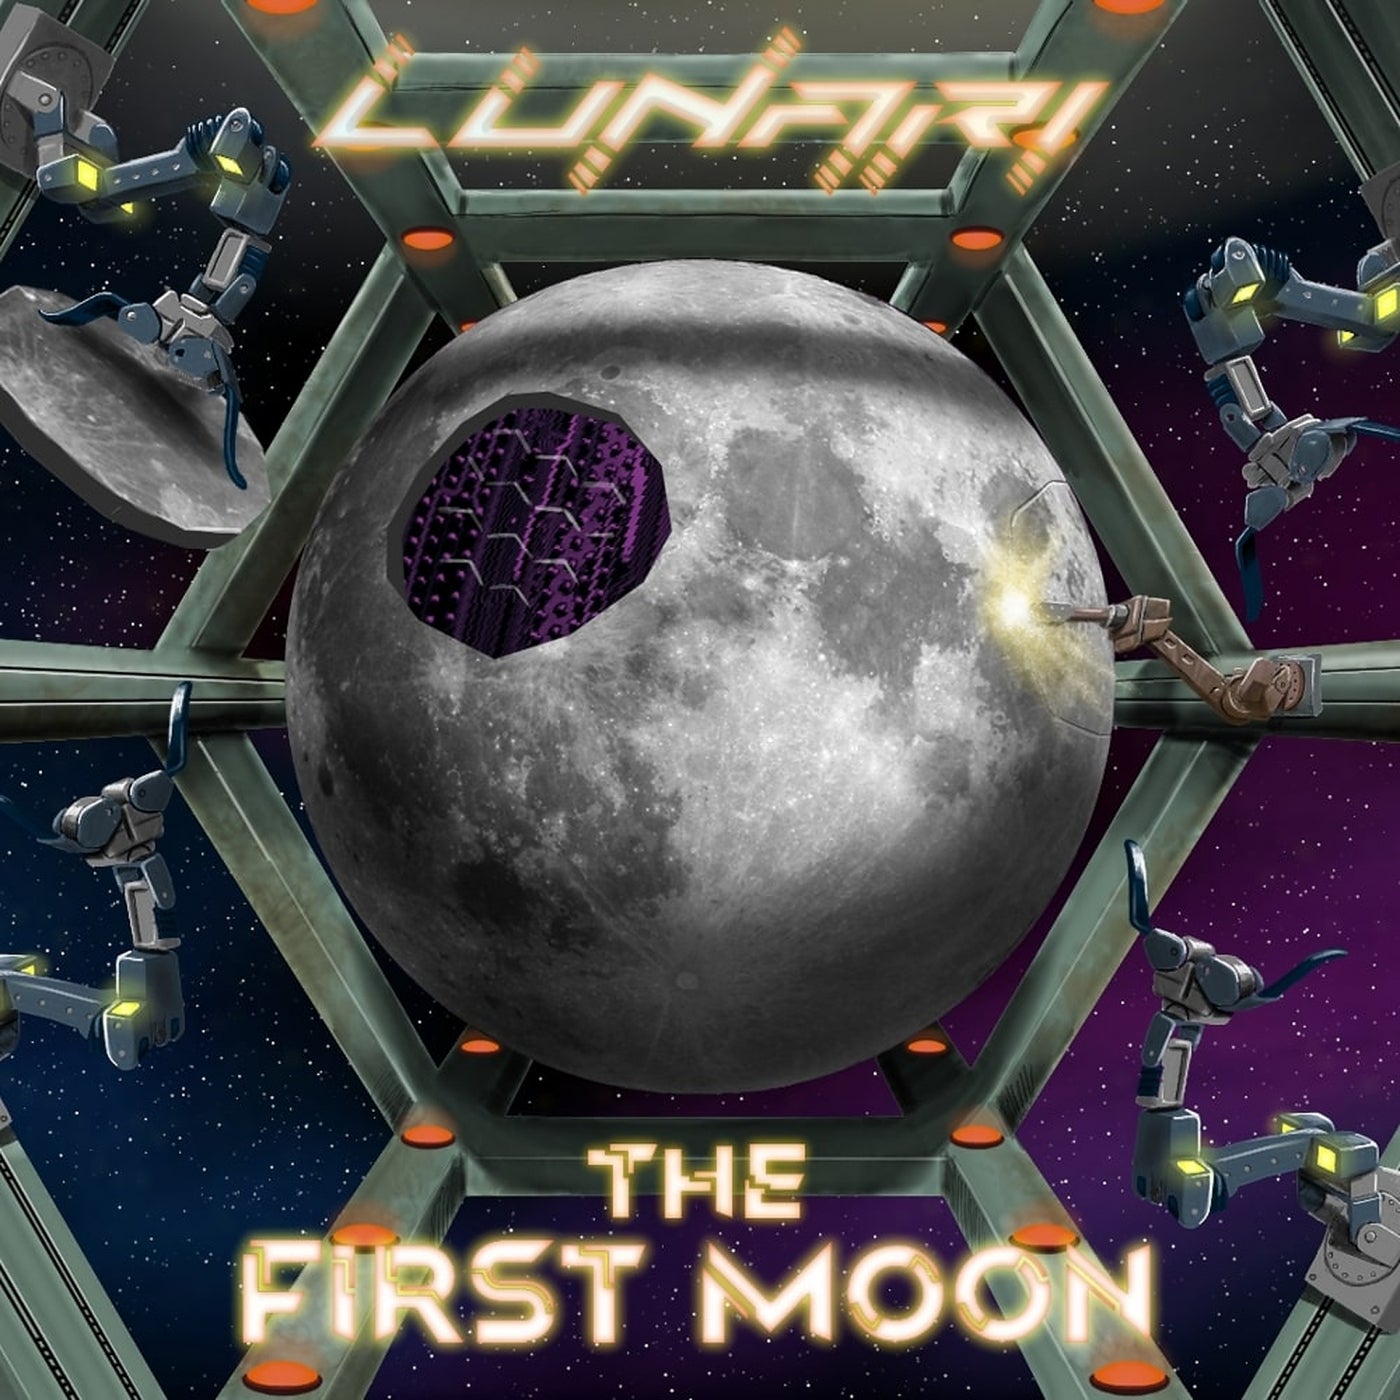 The First Moon